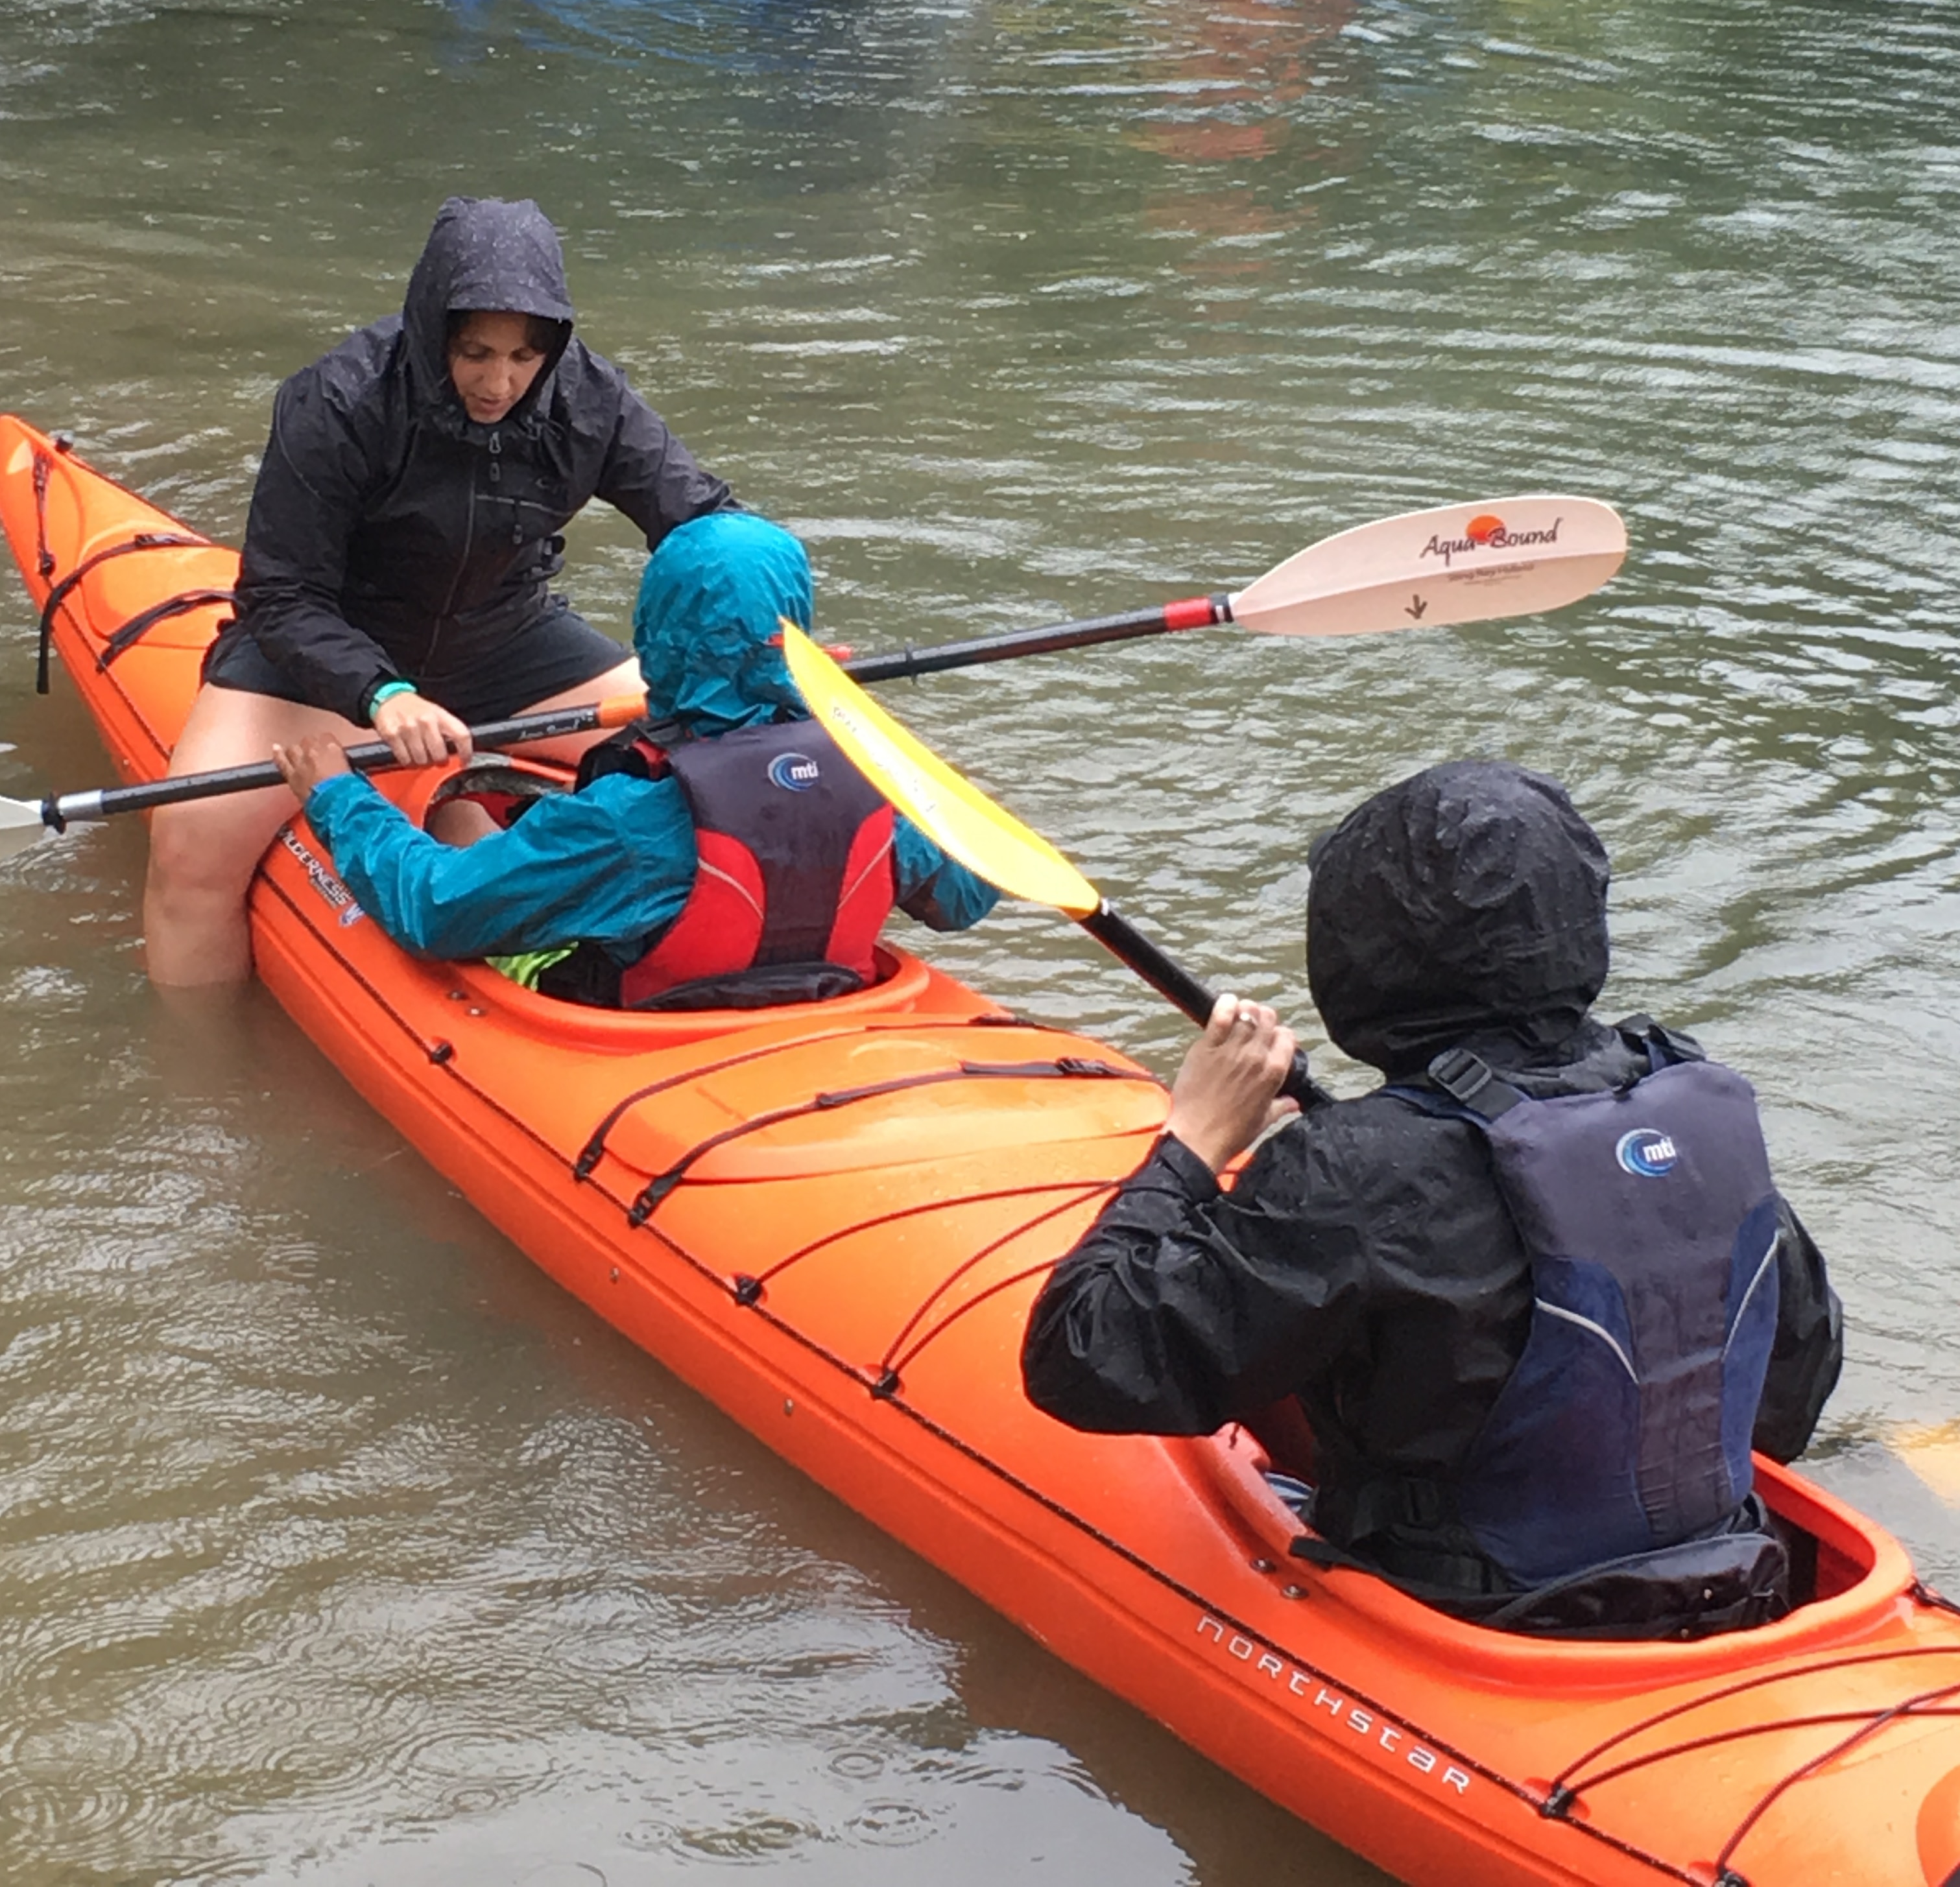 Two paddlers share a tandem kayak with two small cockpits. An instructor is straddling the kayak and giving instructions on paddle use.